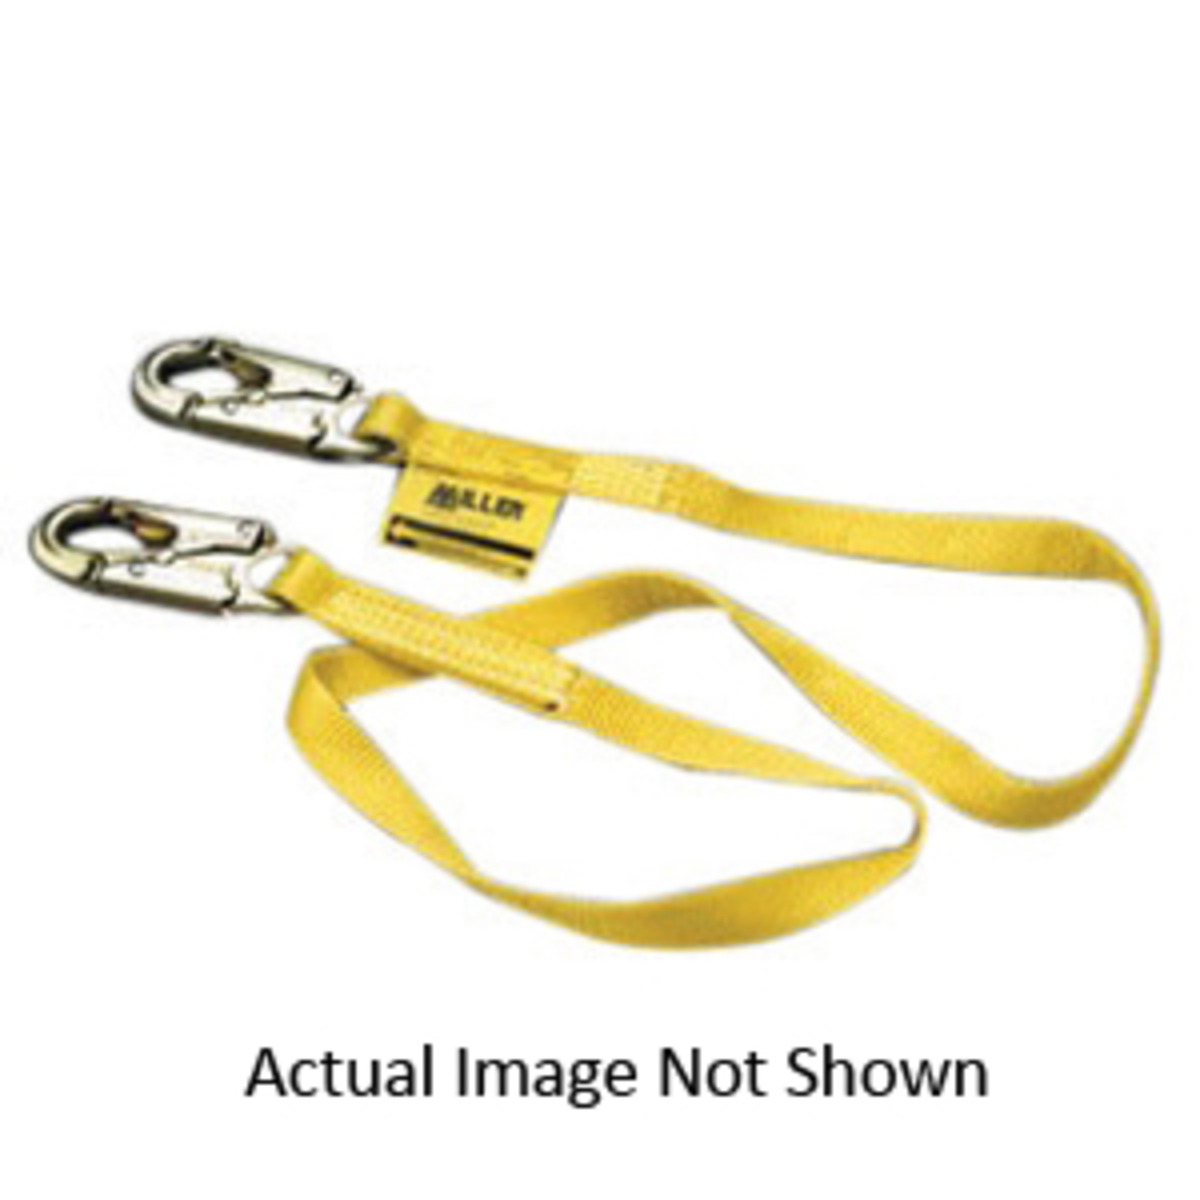 Honeywell Miller® 4' Web Positioning Lanyard With Locking Snap Hook Harness Connector